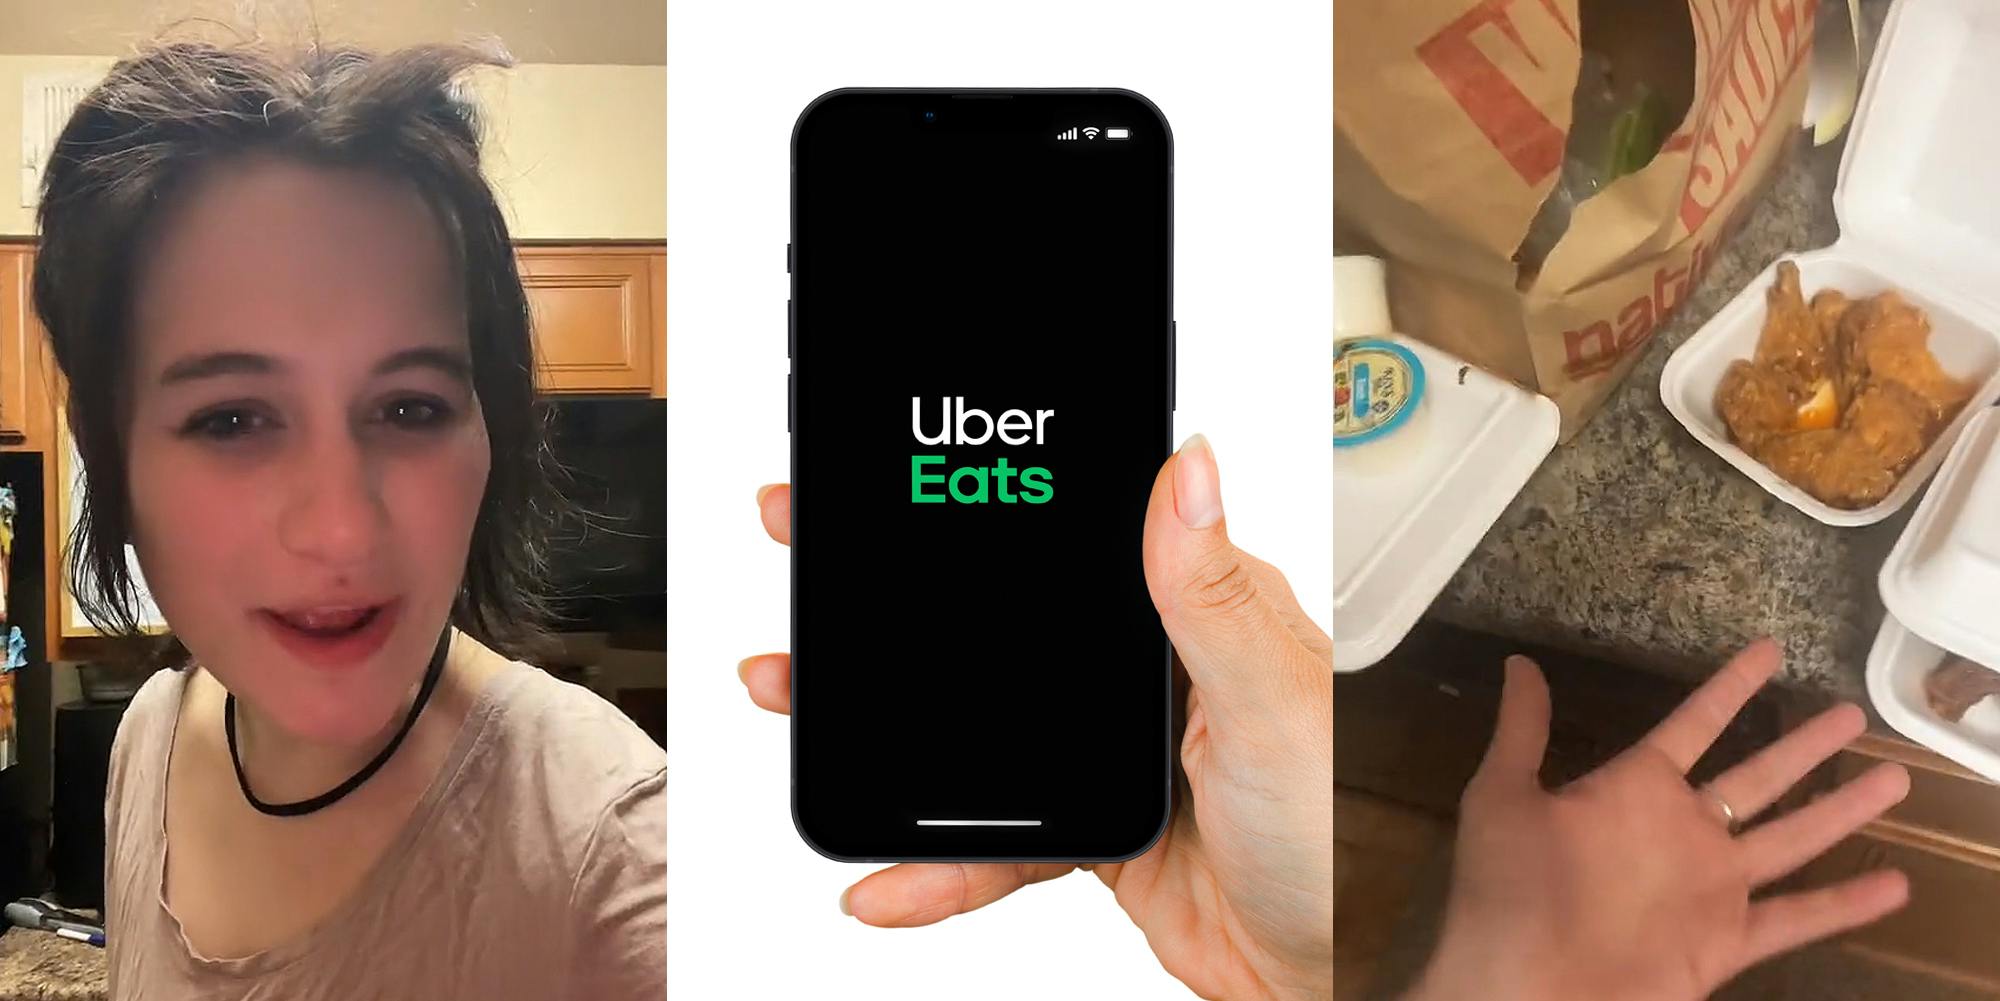 woman speaking in kitchen (l) Uber Eats logo on phone in hand in front of white background (c) woman hand out showing food on counter (r)